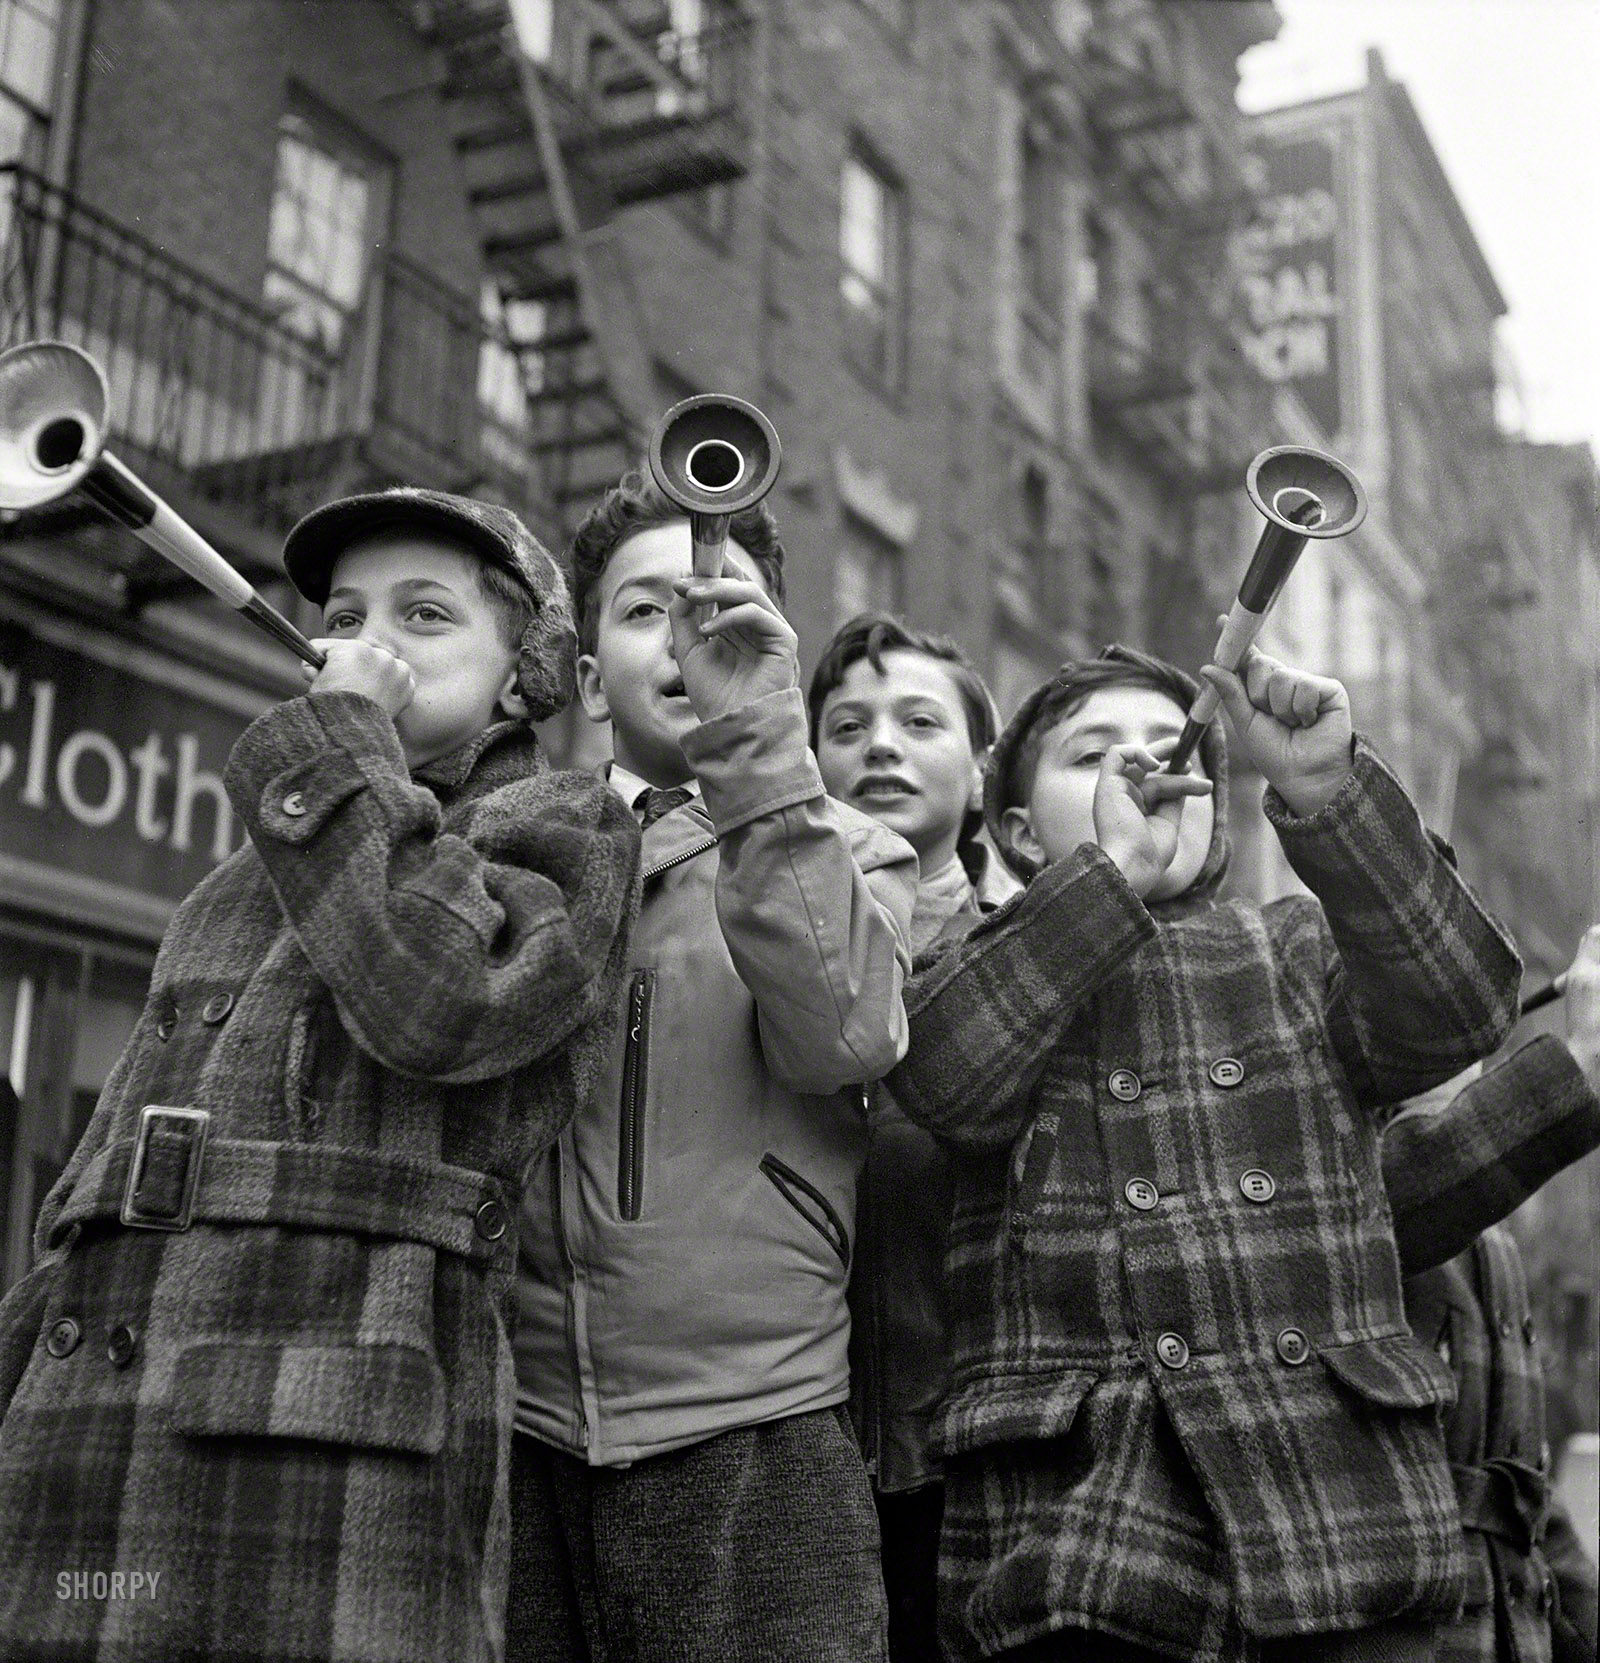 January 1, 1943. "New York. Blowing horns on Bleecker Street on New Year's Day." Photo by Marjory Collins, Office of War Information. View full size.